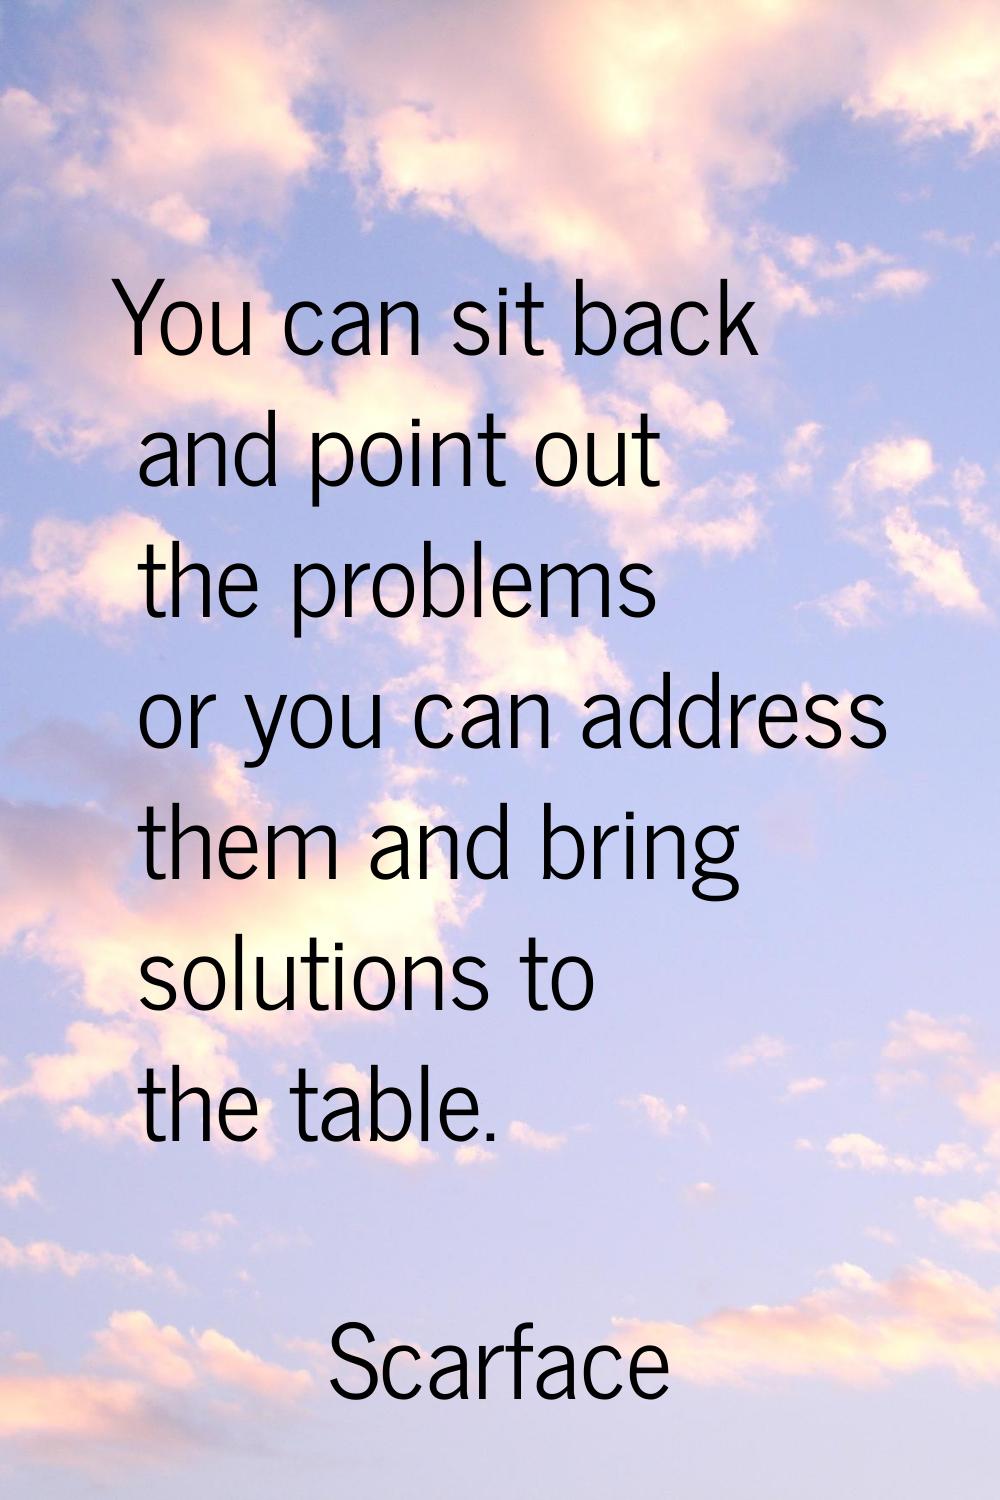 You can sit back and point out the problems or you can address them and bring solutions to the tabl